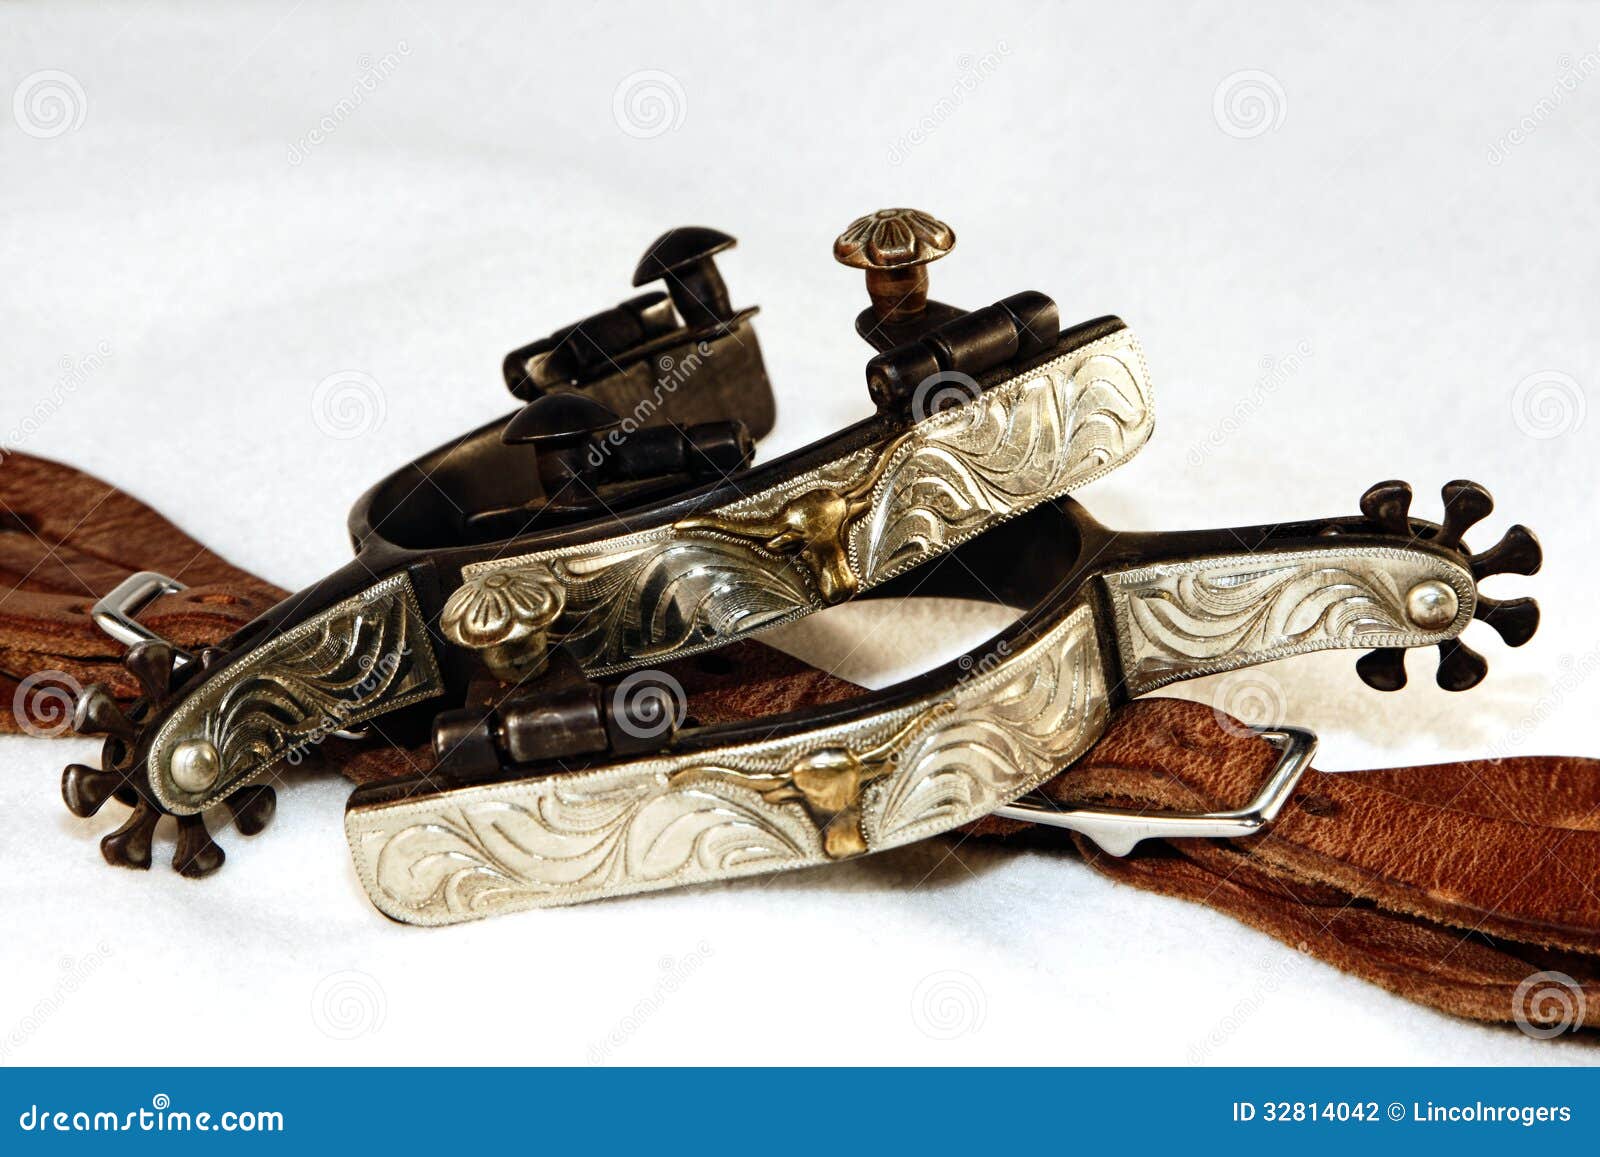 western fancy spurs and leathers